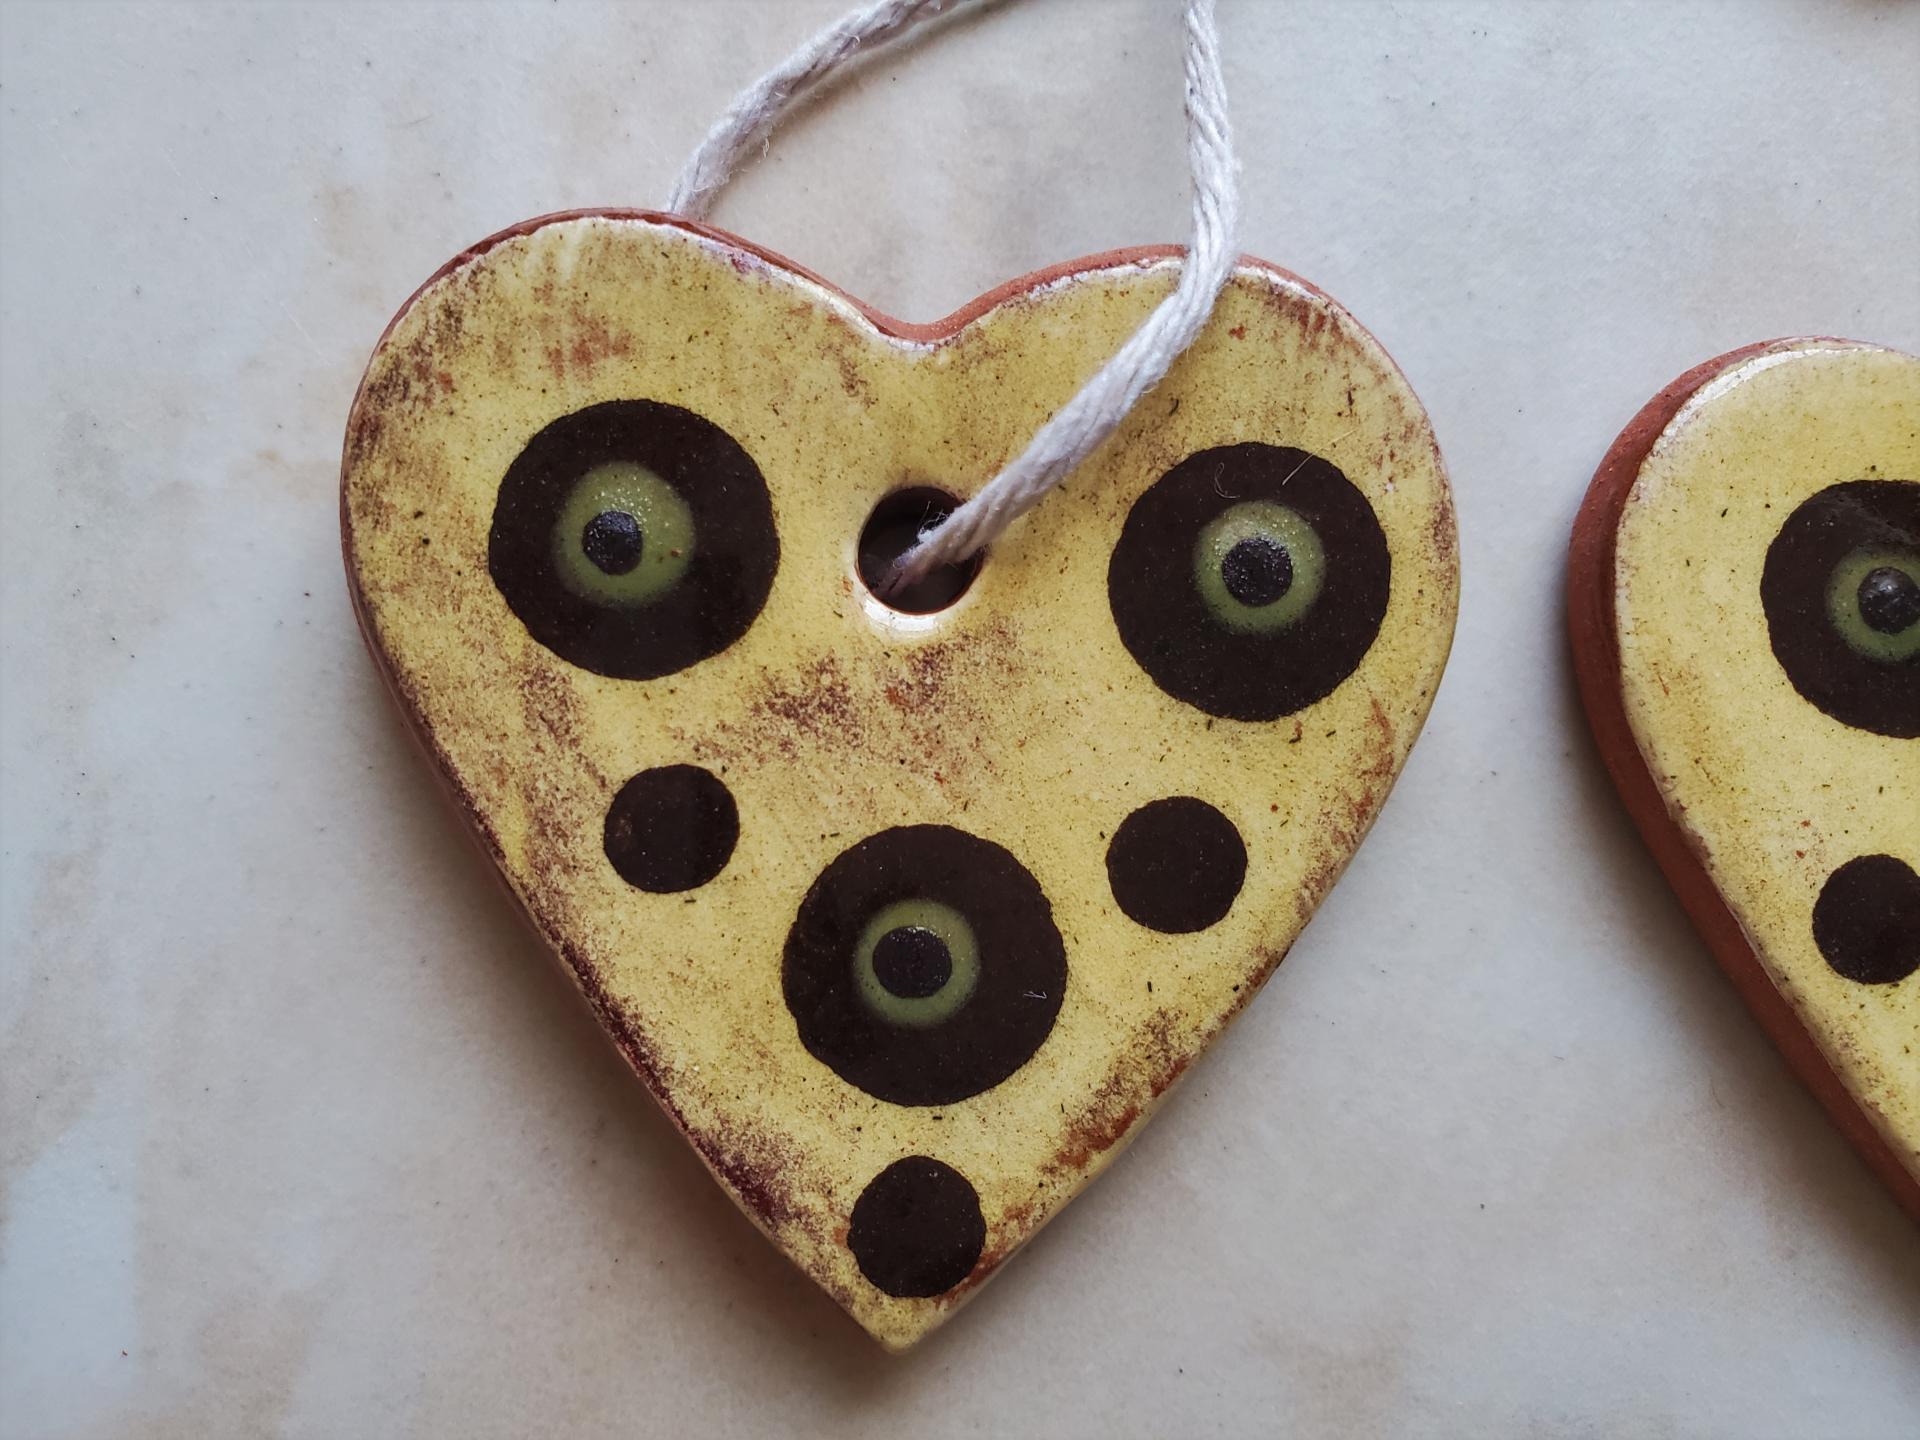 Set of 3 Mini Redware Heart Ornaments by Kulina Folk Art, Handcrafted with Green & Black Dots